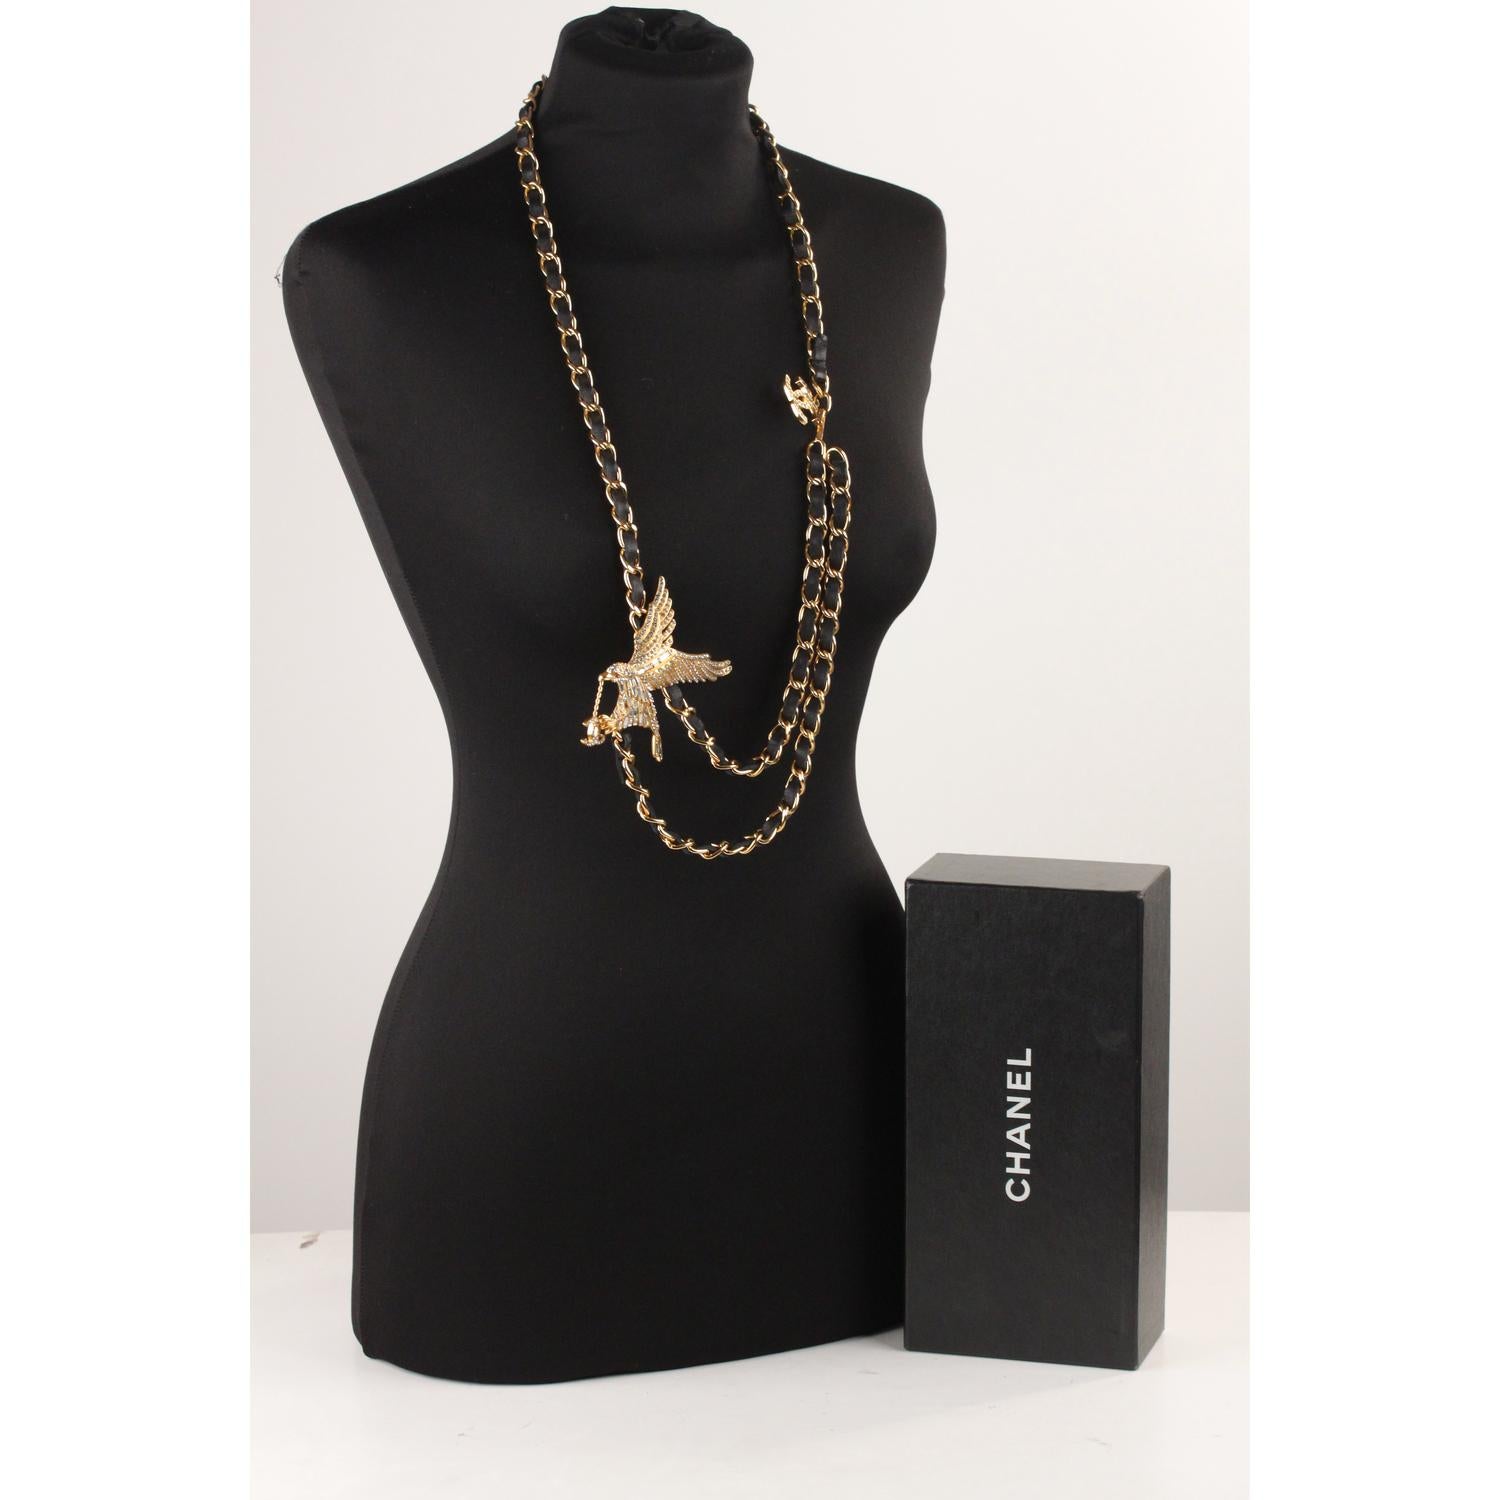 Rare CHANEL chain belt or necklace with beautiful rhinestone eagle, from the 2001 Spring  collection. It is very versatile and will complete every look (you can use it as a necklace or as a belt). Black leatehr interwoven chain with CC - chanel